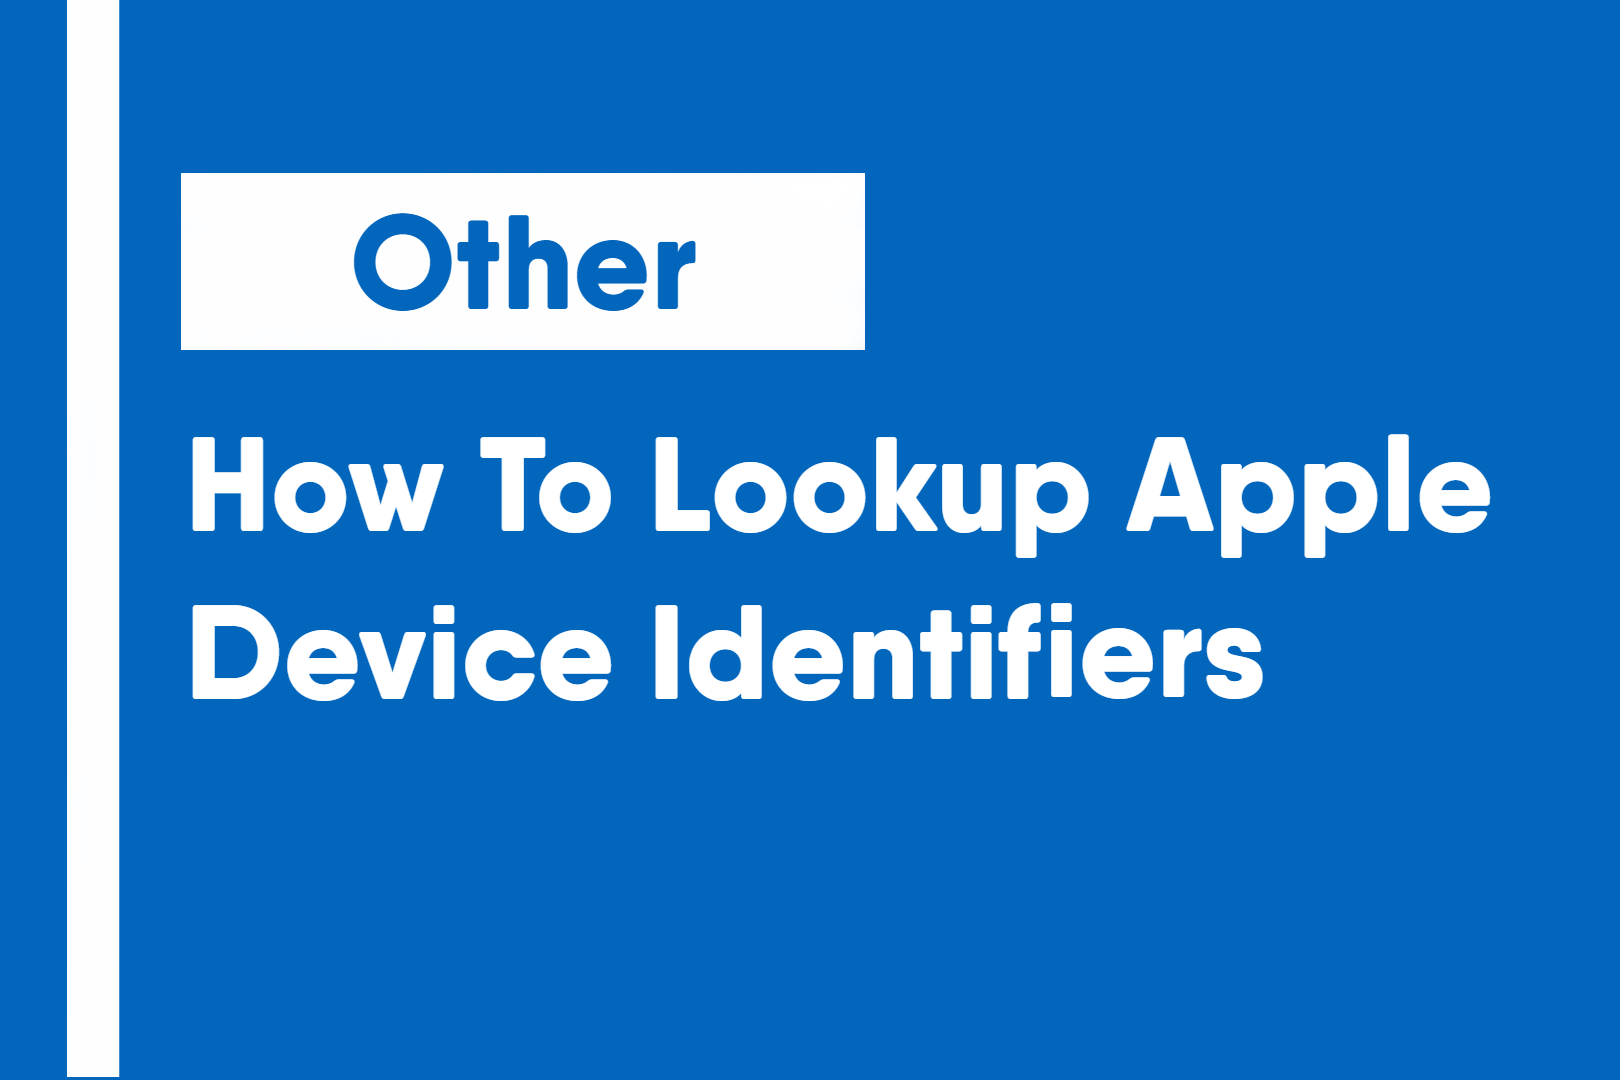 How To Lookup Apple Device Identifiers